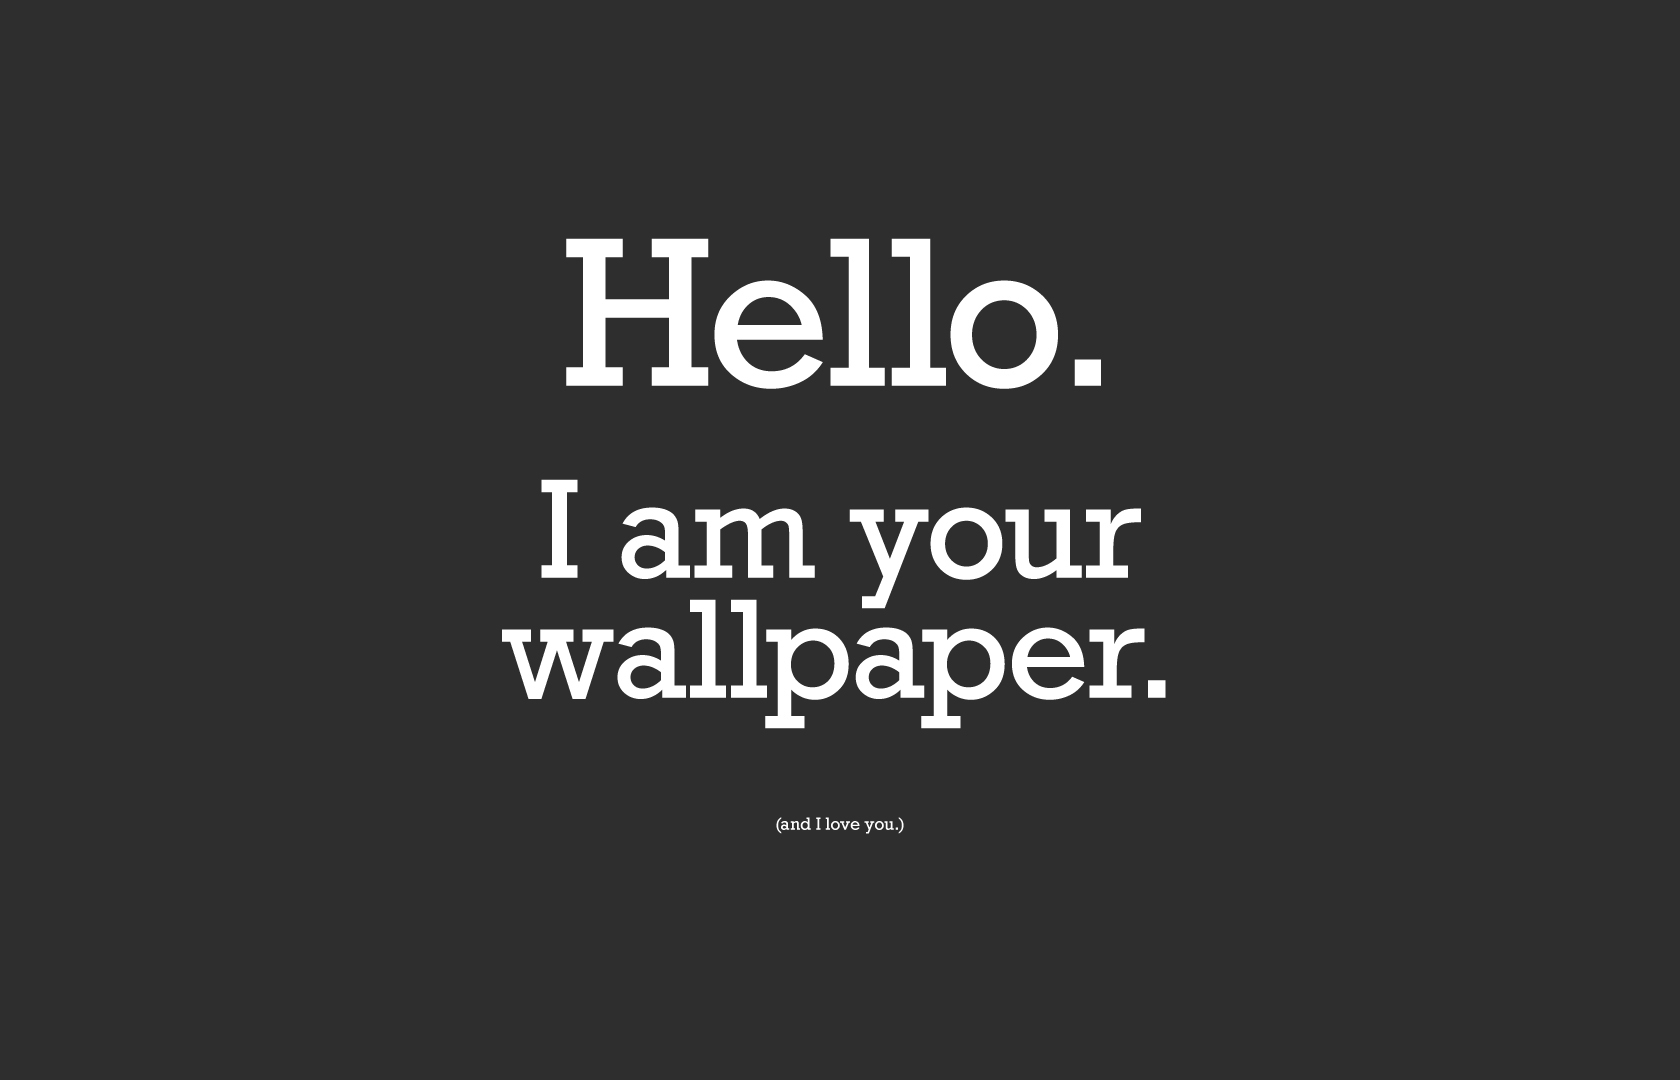 Funny Wallpapers Hd With Quotes #3137 Wallpaper | idwallpics.com